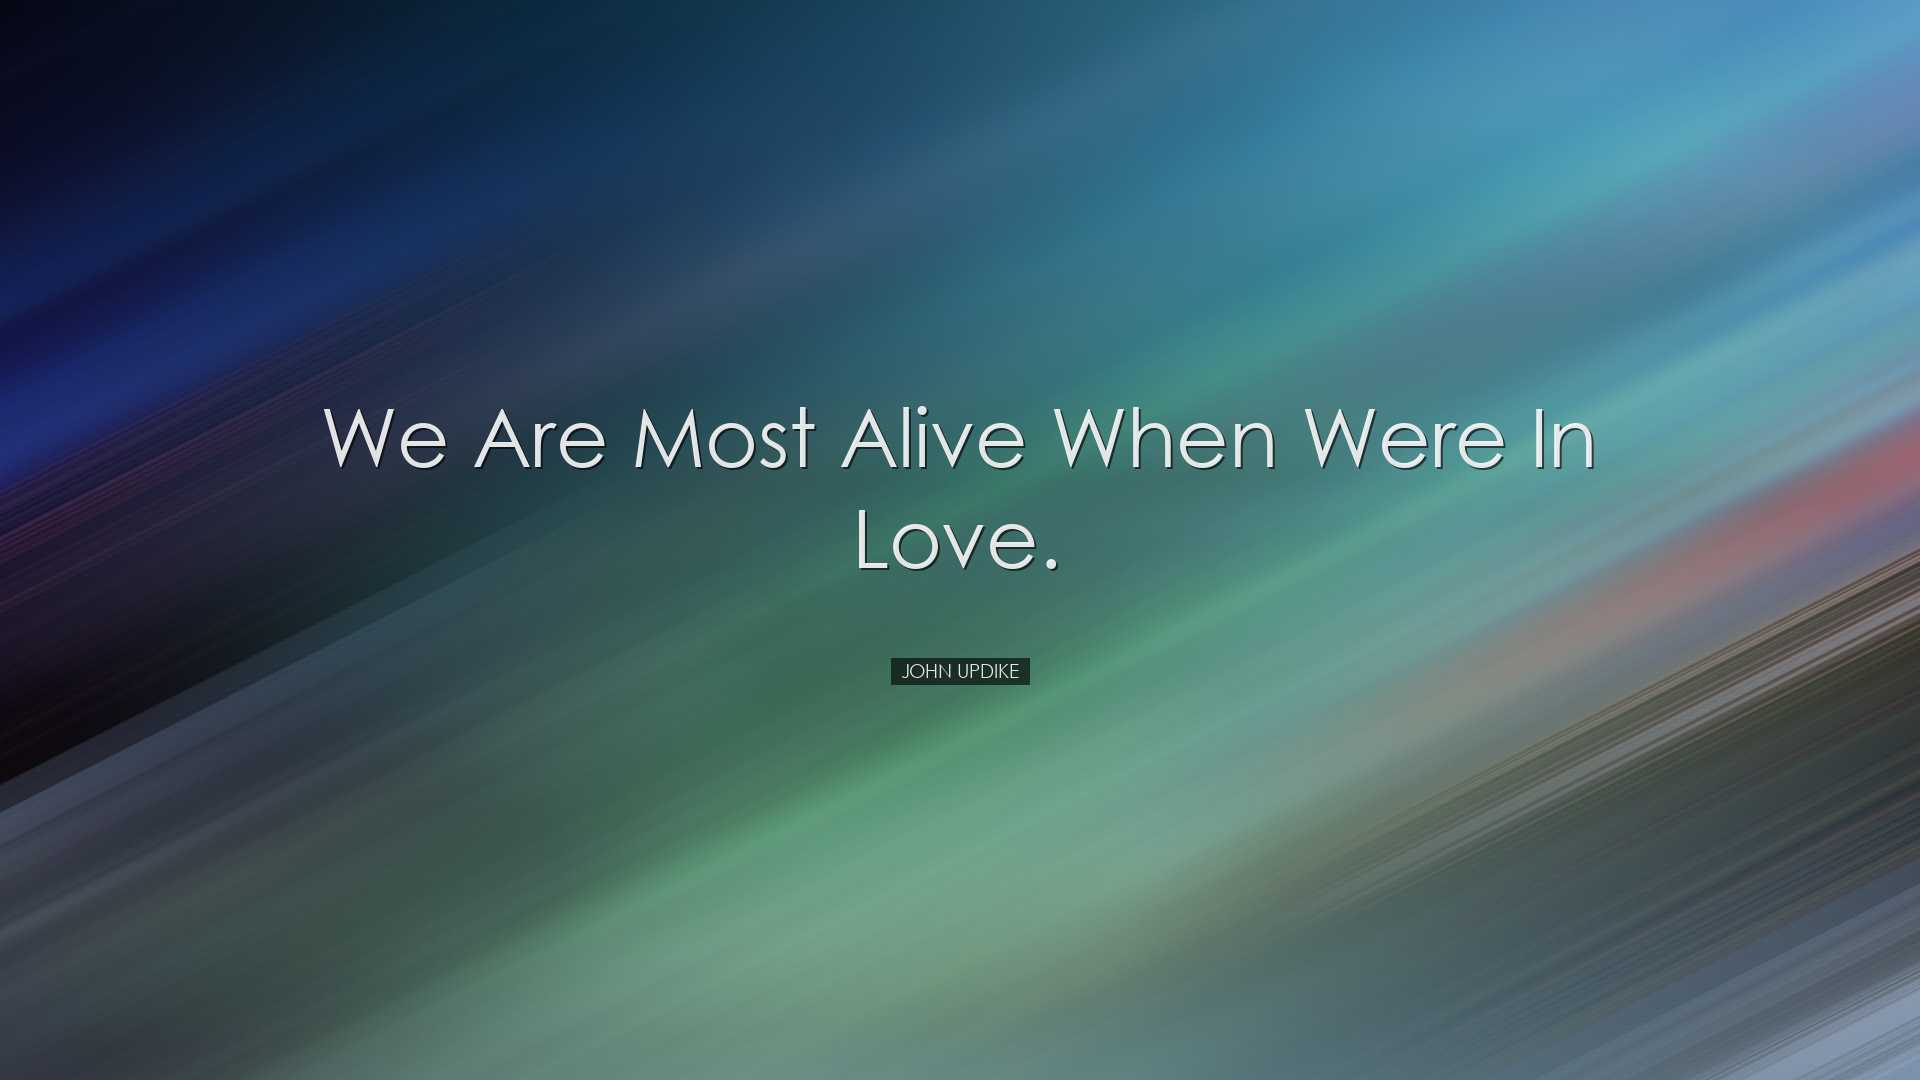 We are most alive when were in love. - John Updike